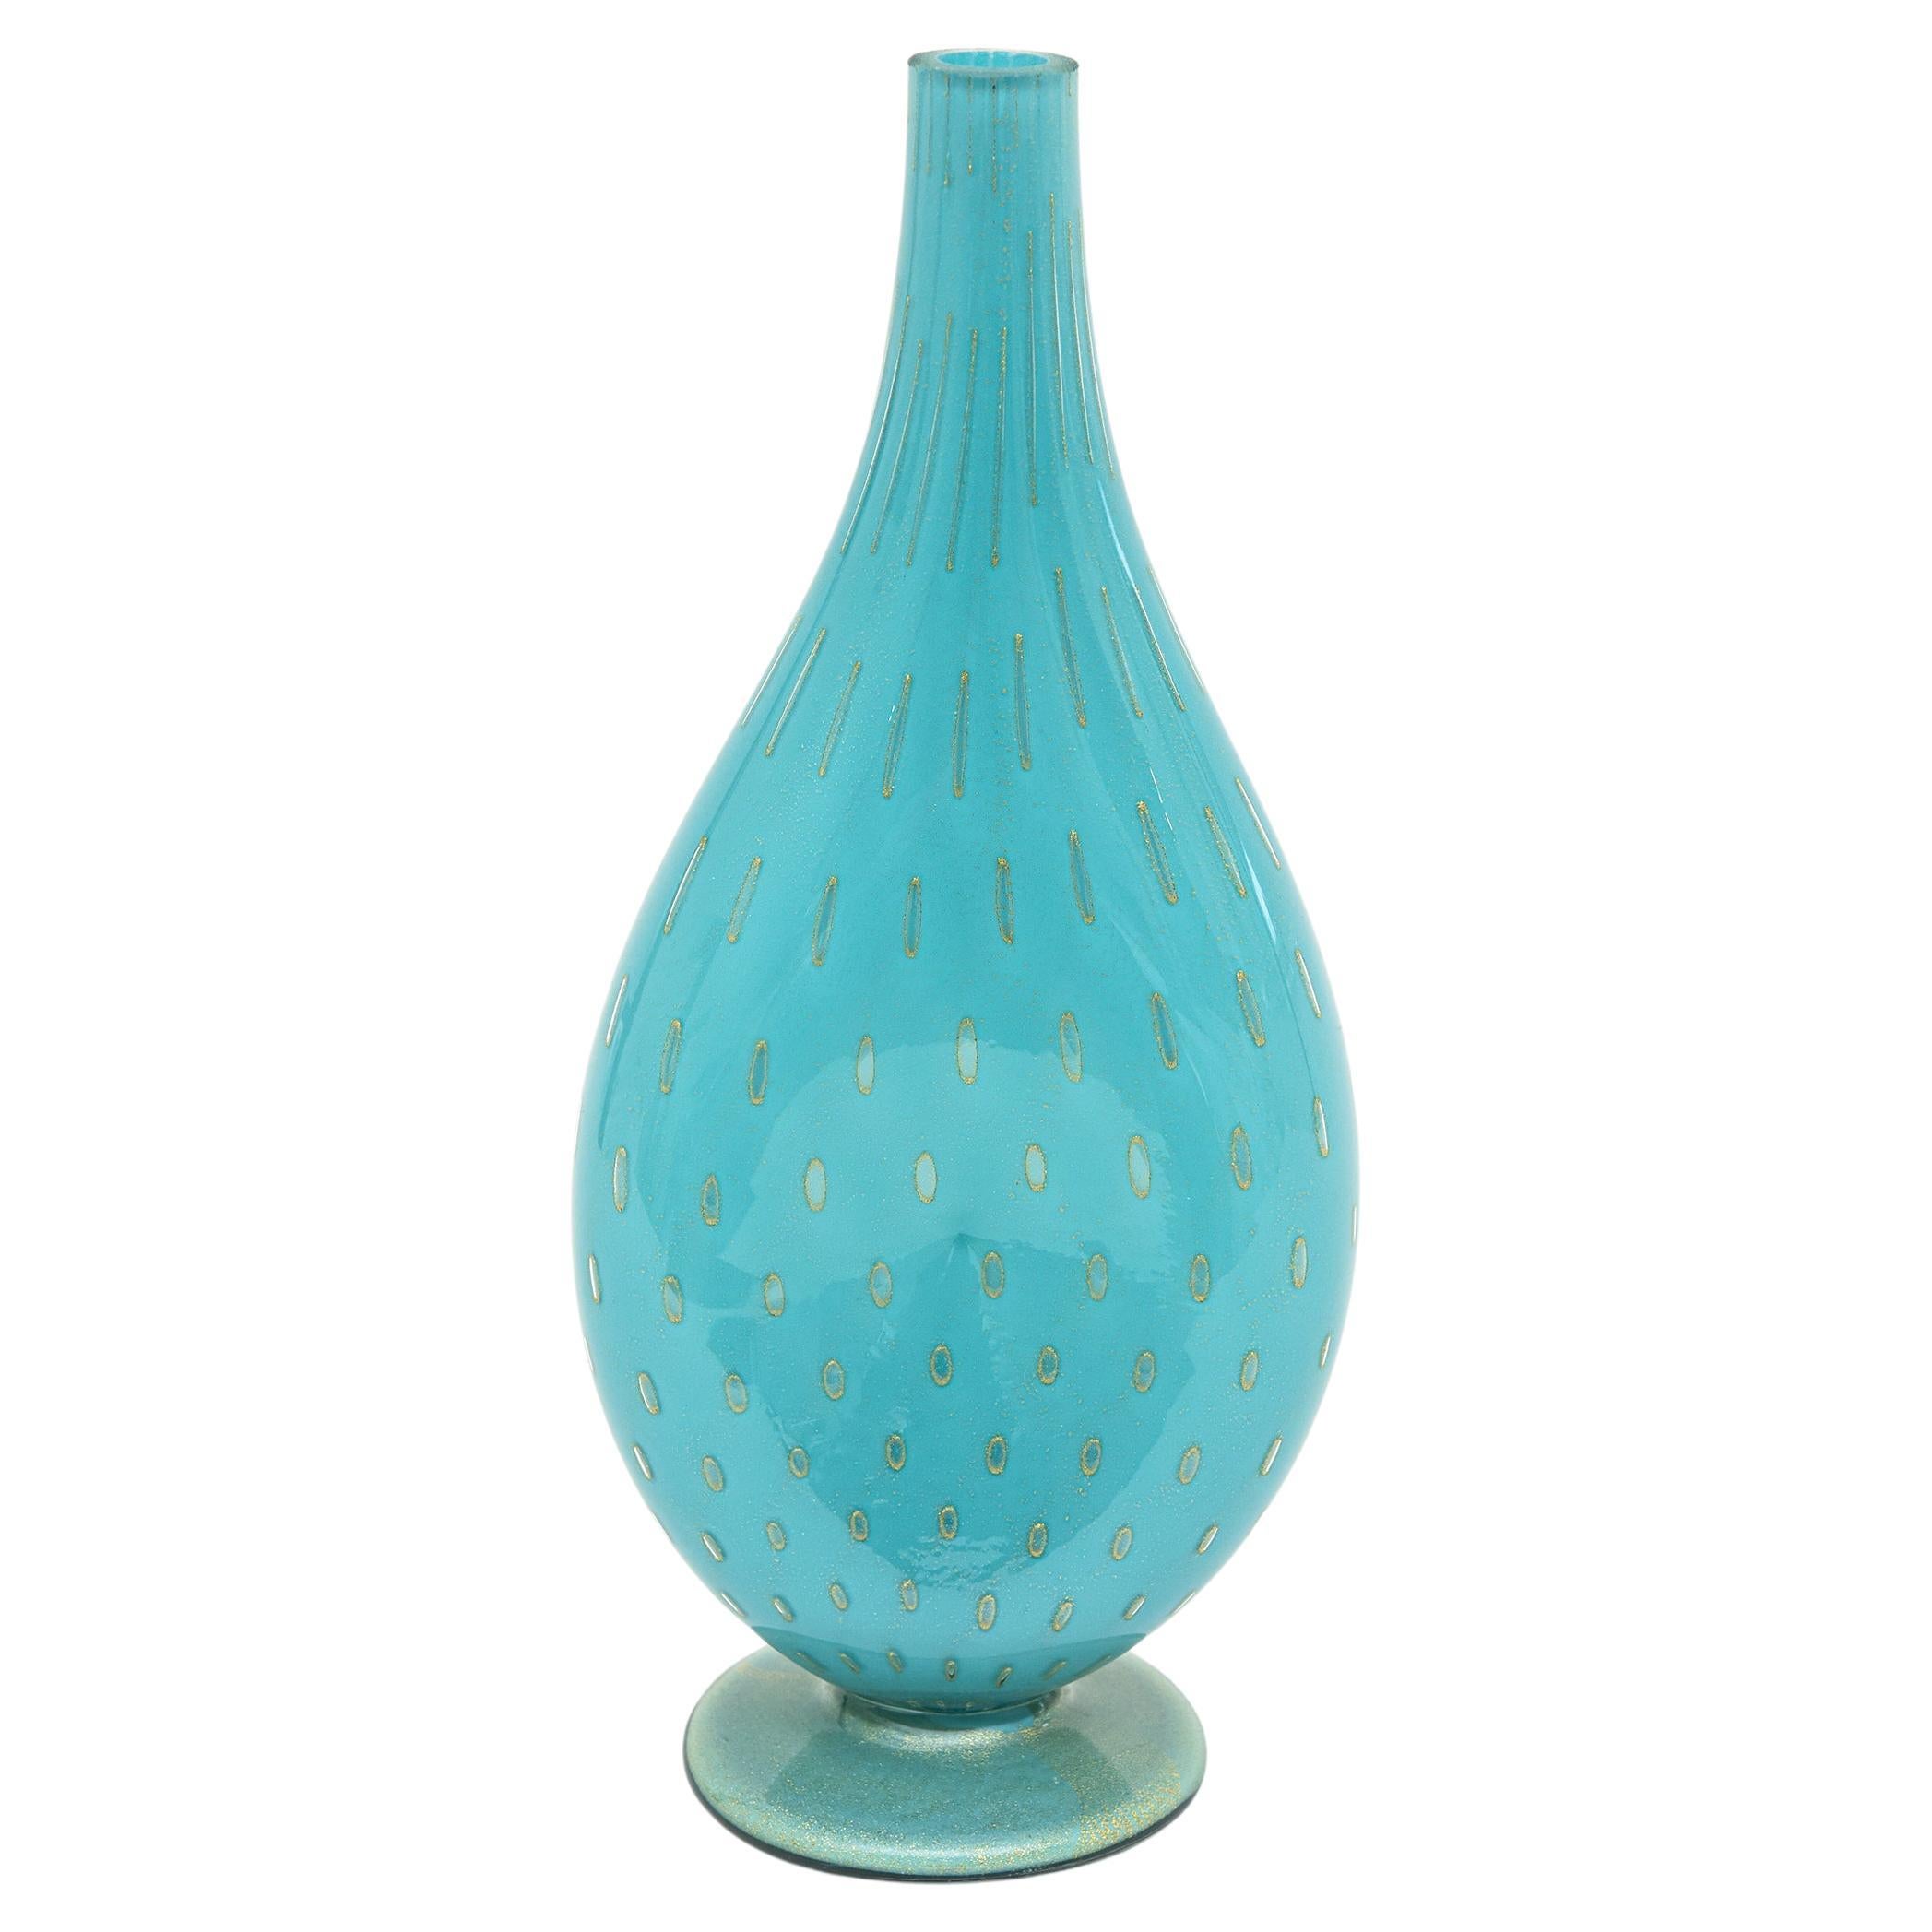 Vintage Barovier&Toso Murano Turquoise Glass Vessel Bottle With Gold Droplets (Bouteille en verre turquoise avec des gouttes d'or)